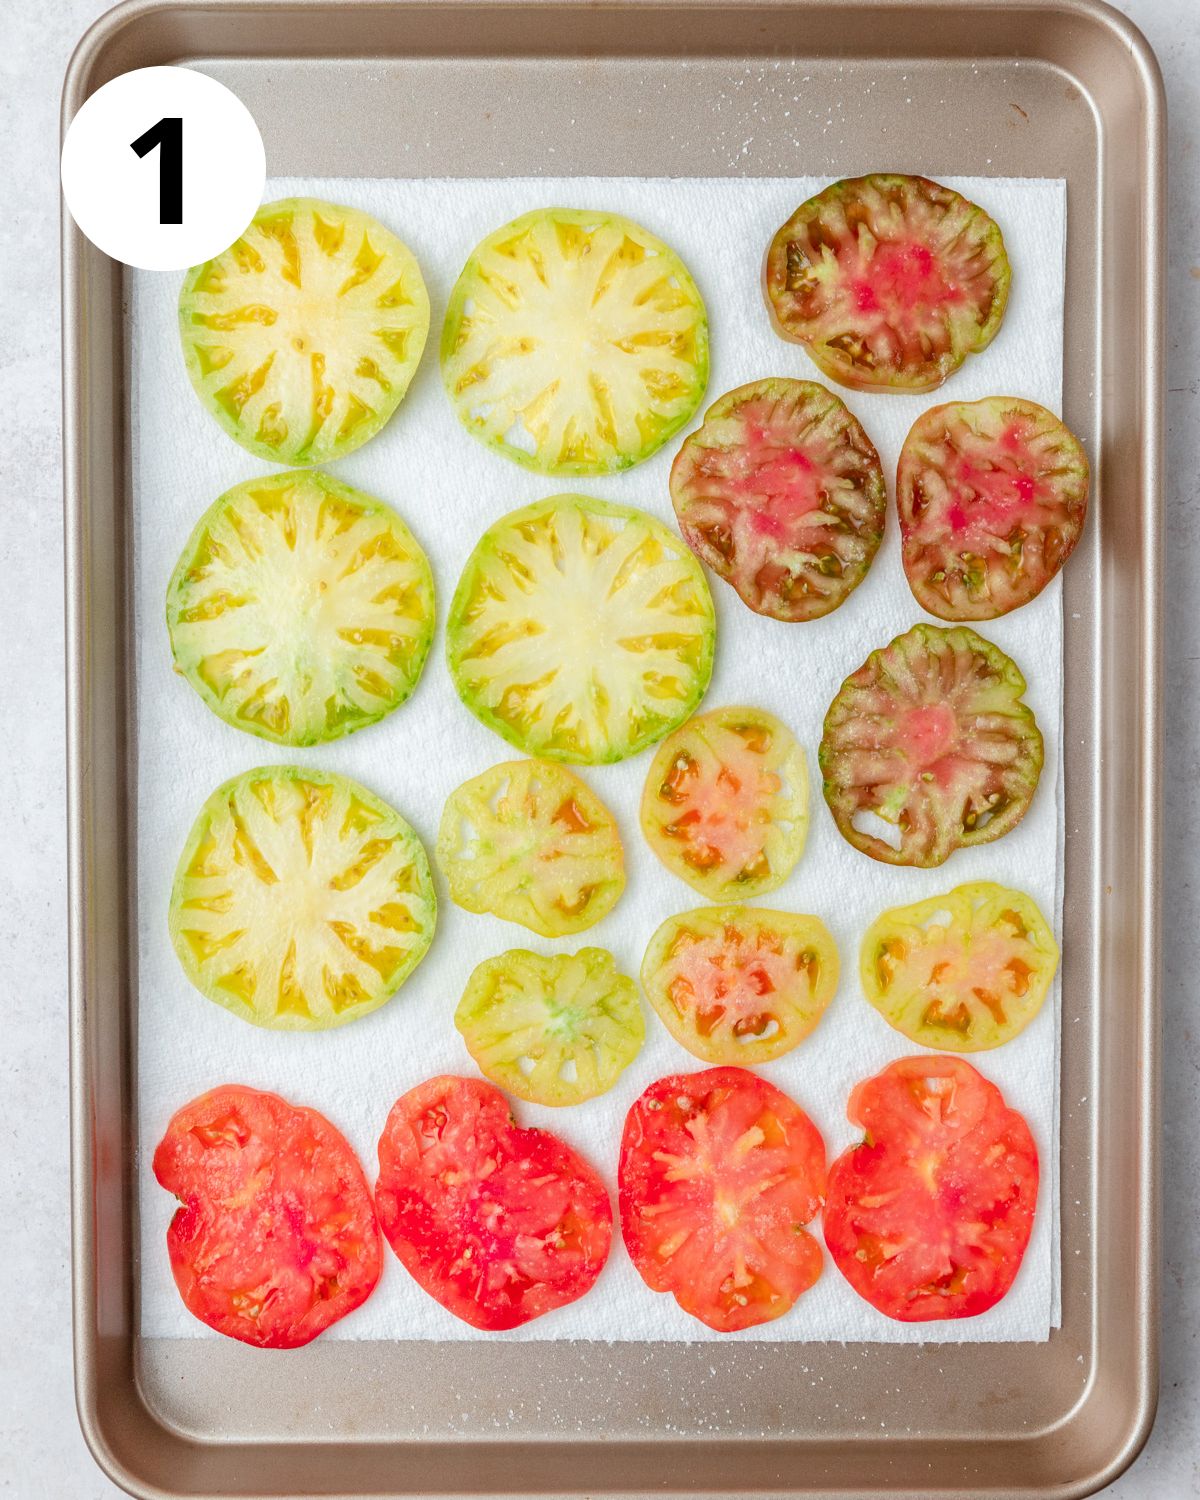 sliced heirloom tomatoes being salted to remove moisture.